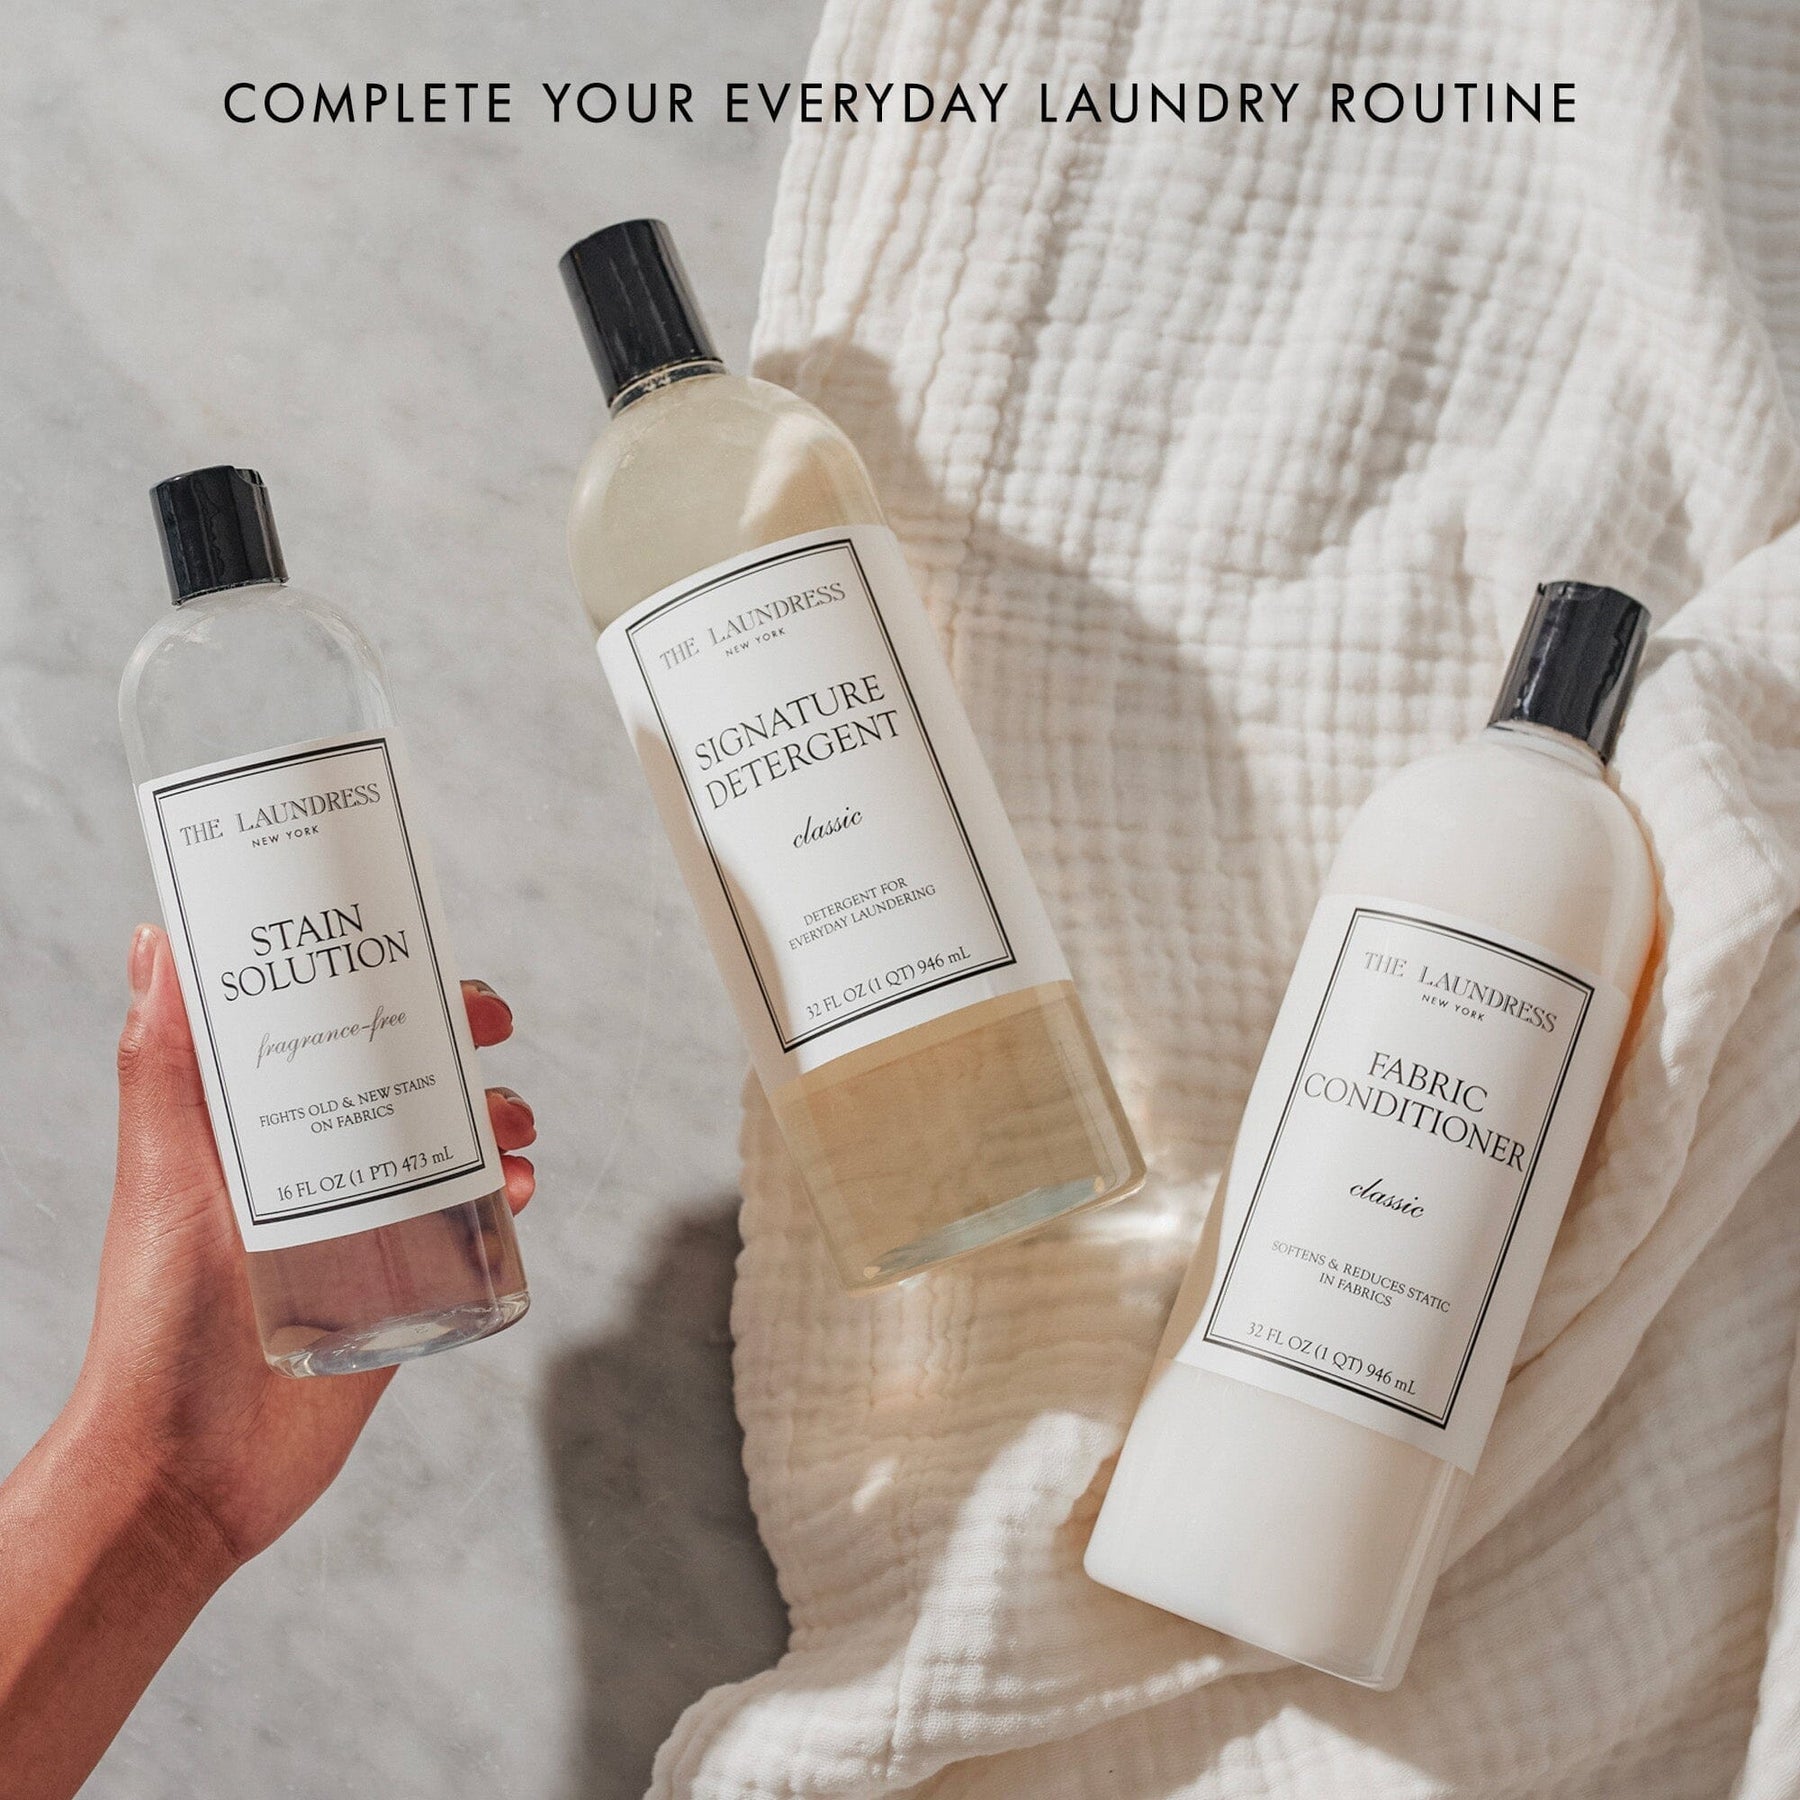 Laundress Stain Solution – 16oz